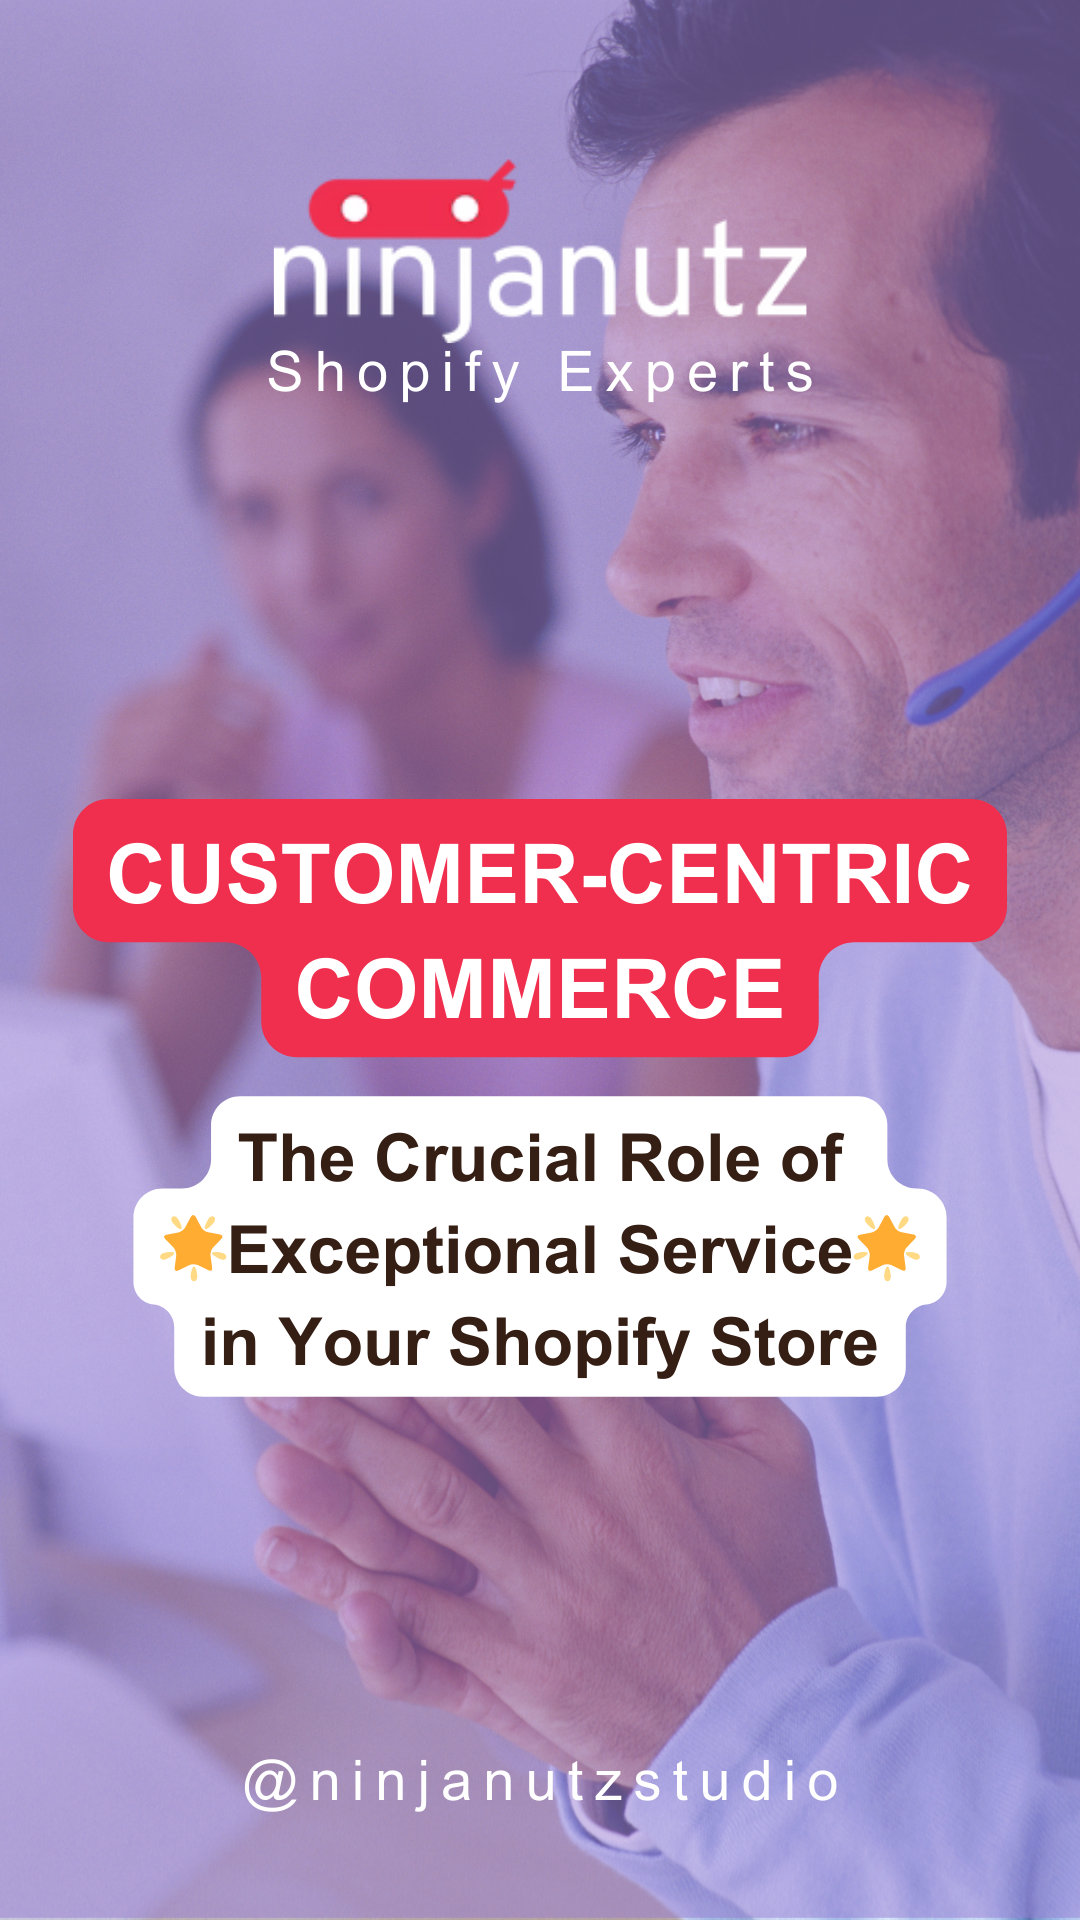 Customer-Centric-Commerce-The-Crucial-Role-of-Exceptional-Service-in-Your-Shopify-Store NinjaNutz®